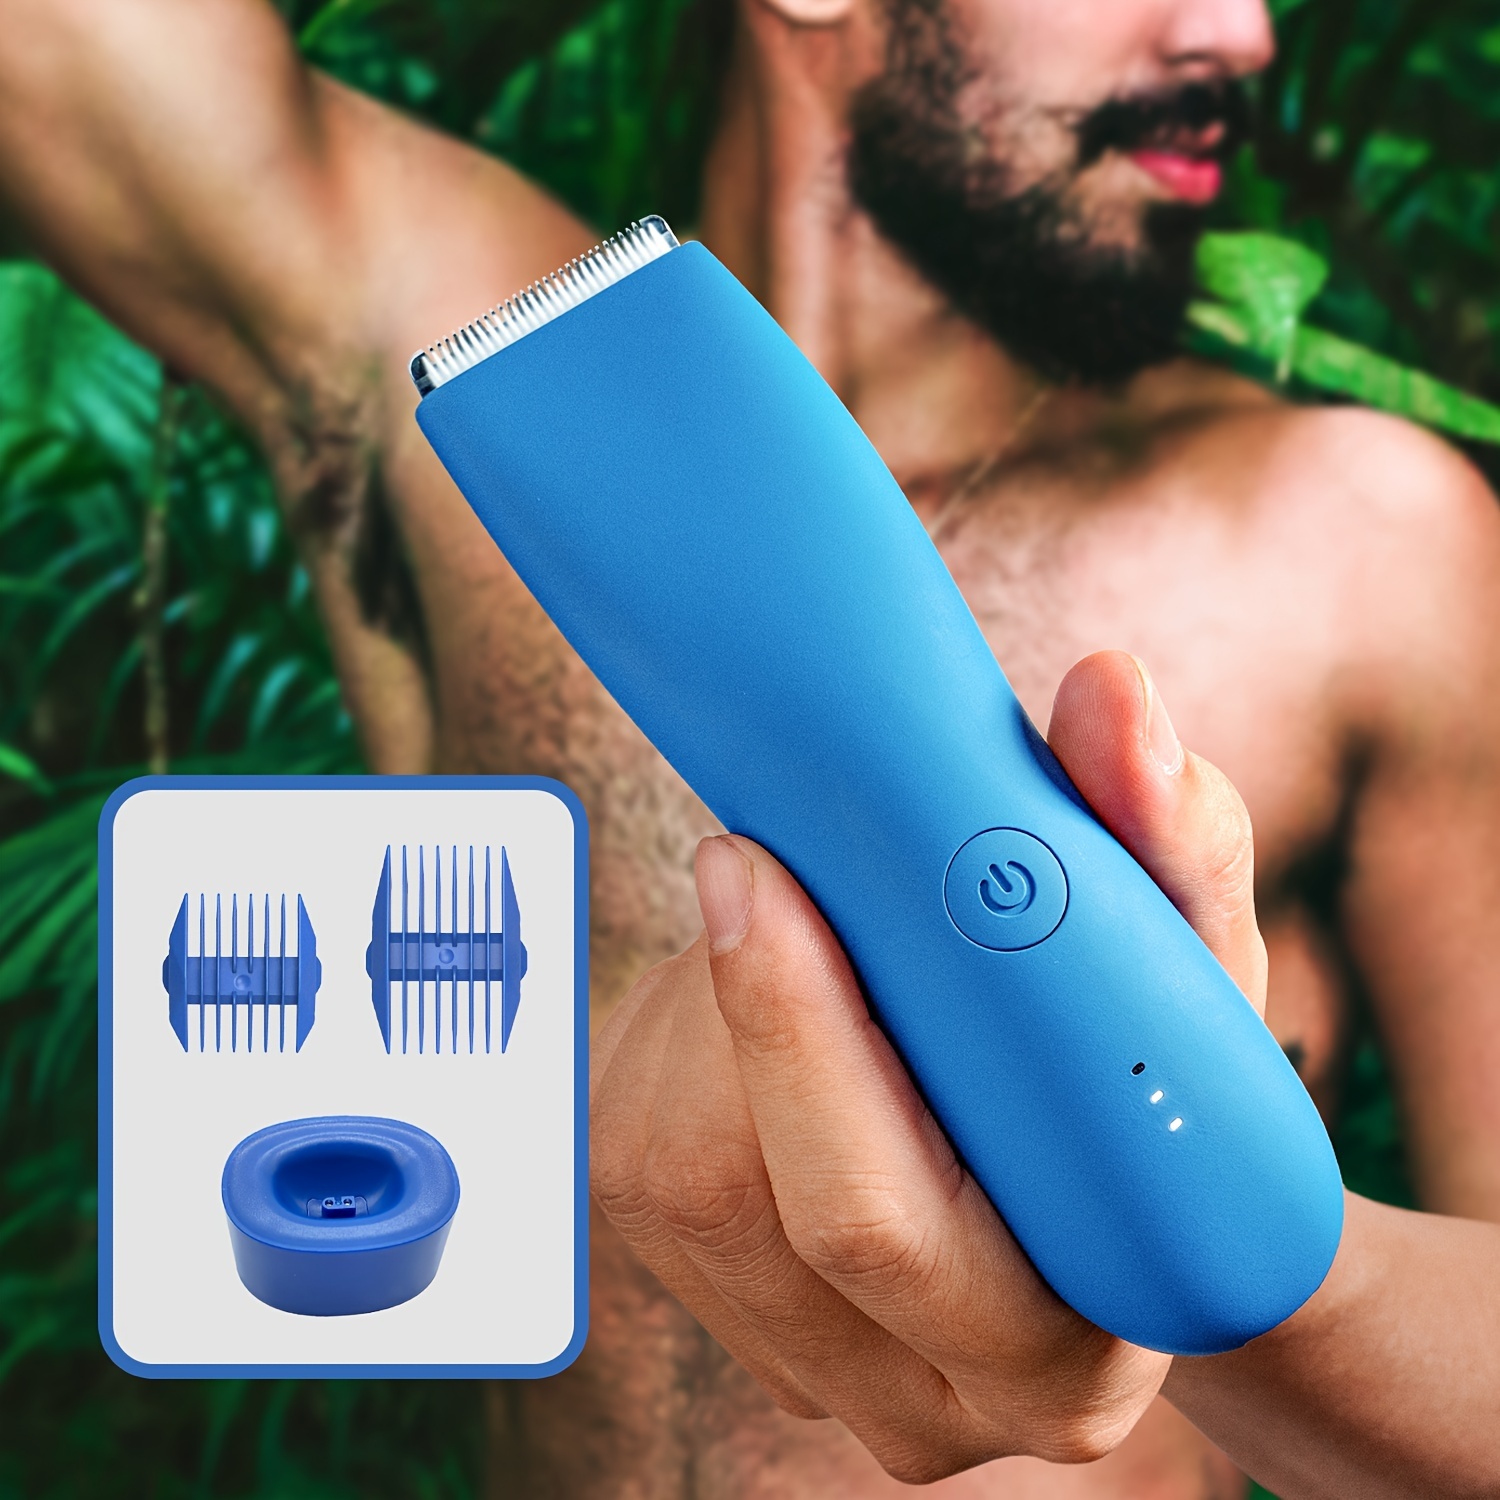 

Ball Trimmer For Men, Electric Body Hair Trimmer Kit, Perfect Grooming Tool, Wet/dry Rechargeable Shaver, Groin & Pubic Hair Care Hygiene Razor, Home Haircut Clippers - Gifts For Men